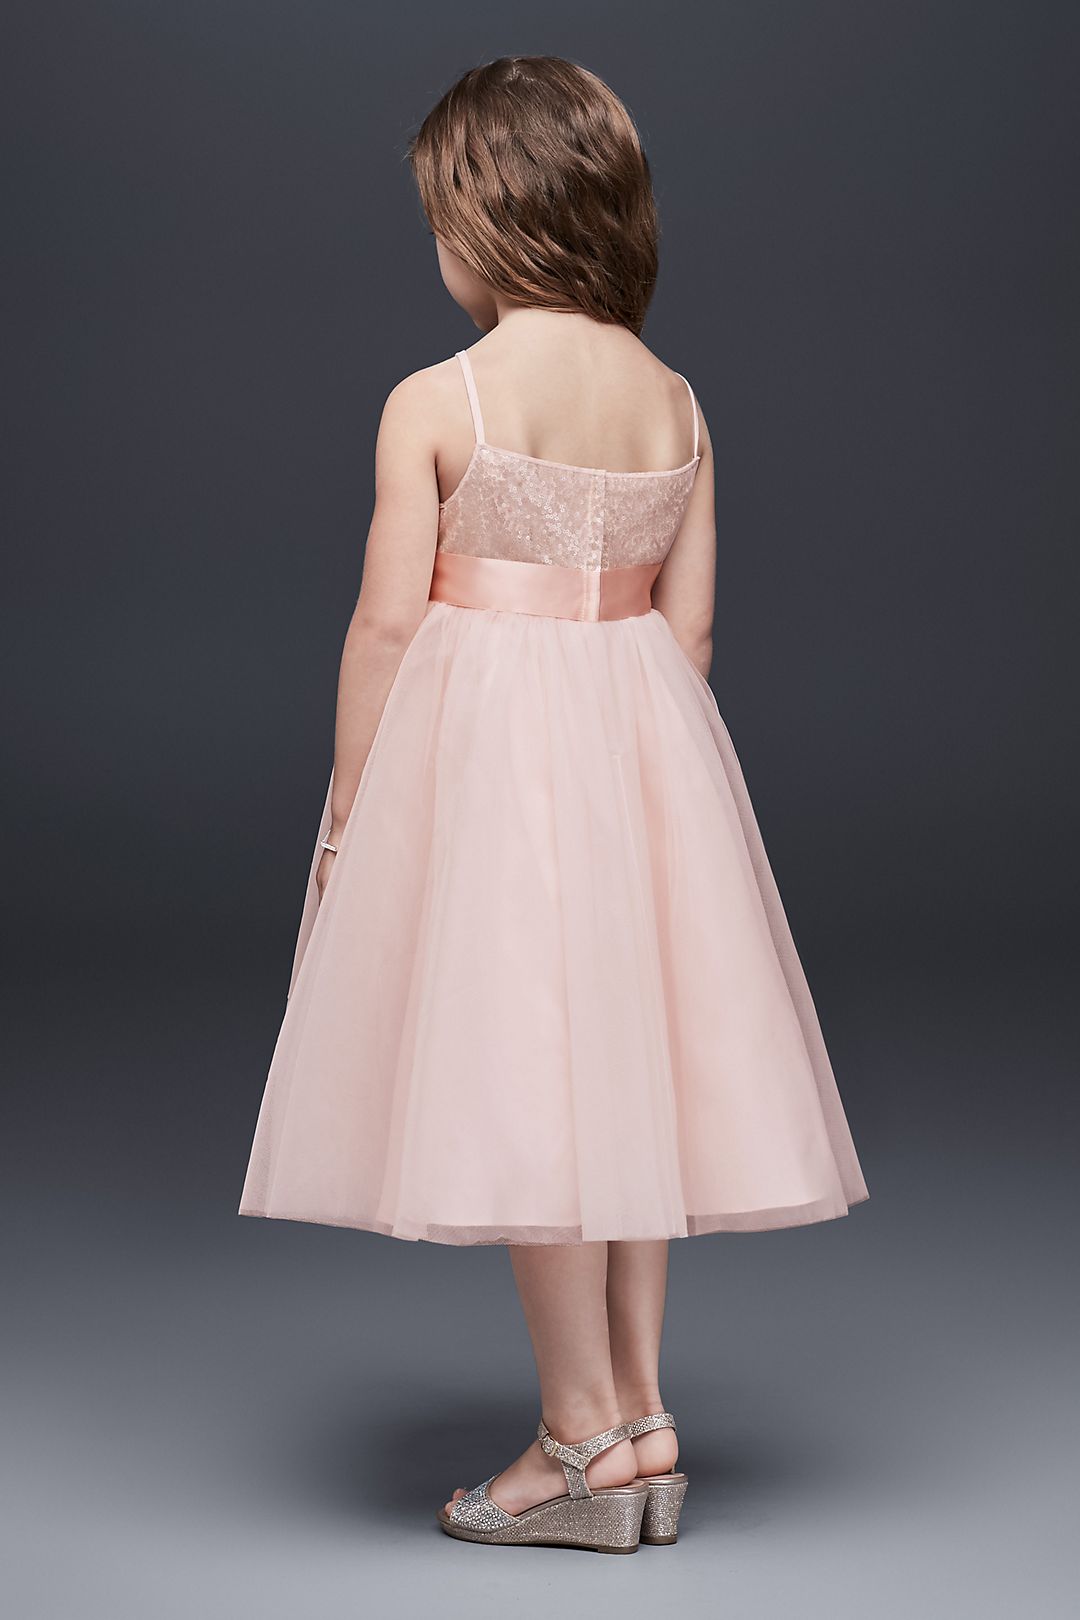 Sequin and Tulle Flower Girl Dress with Satin Sash Image 2